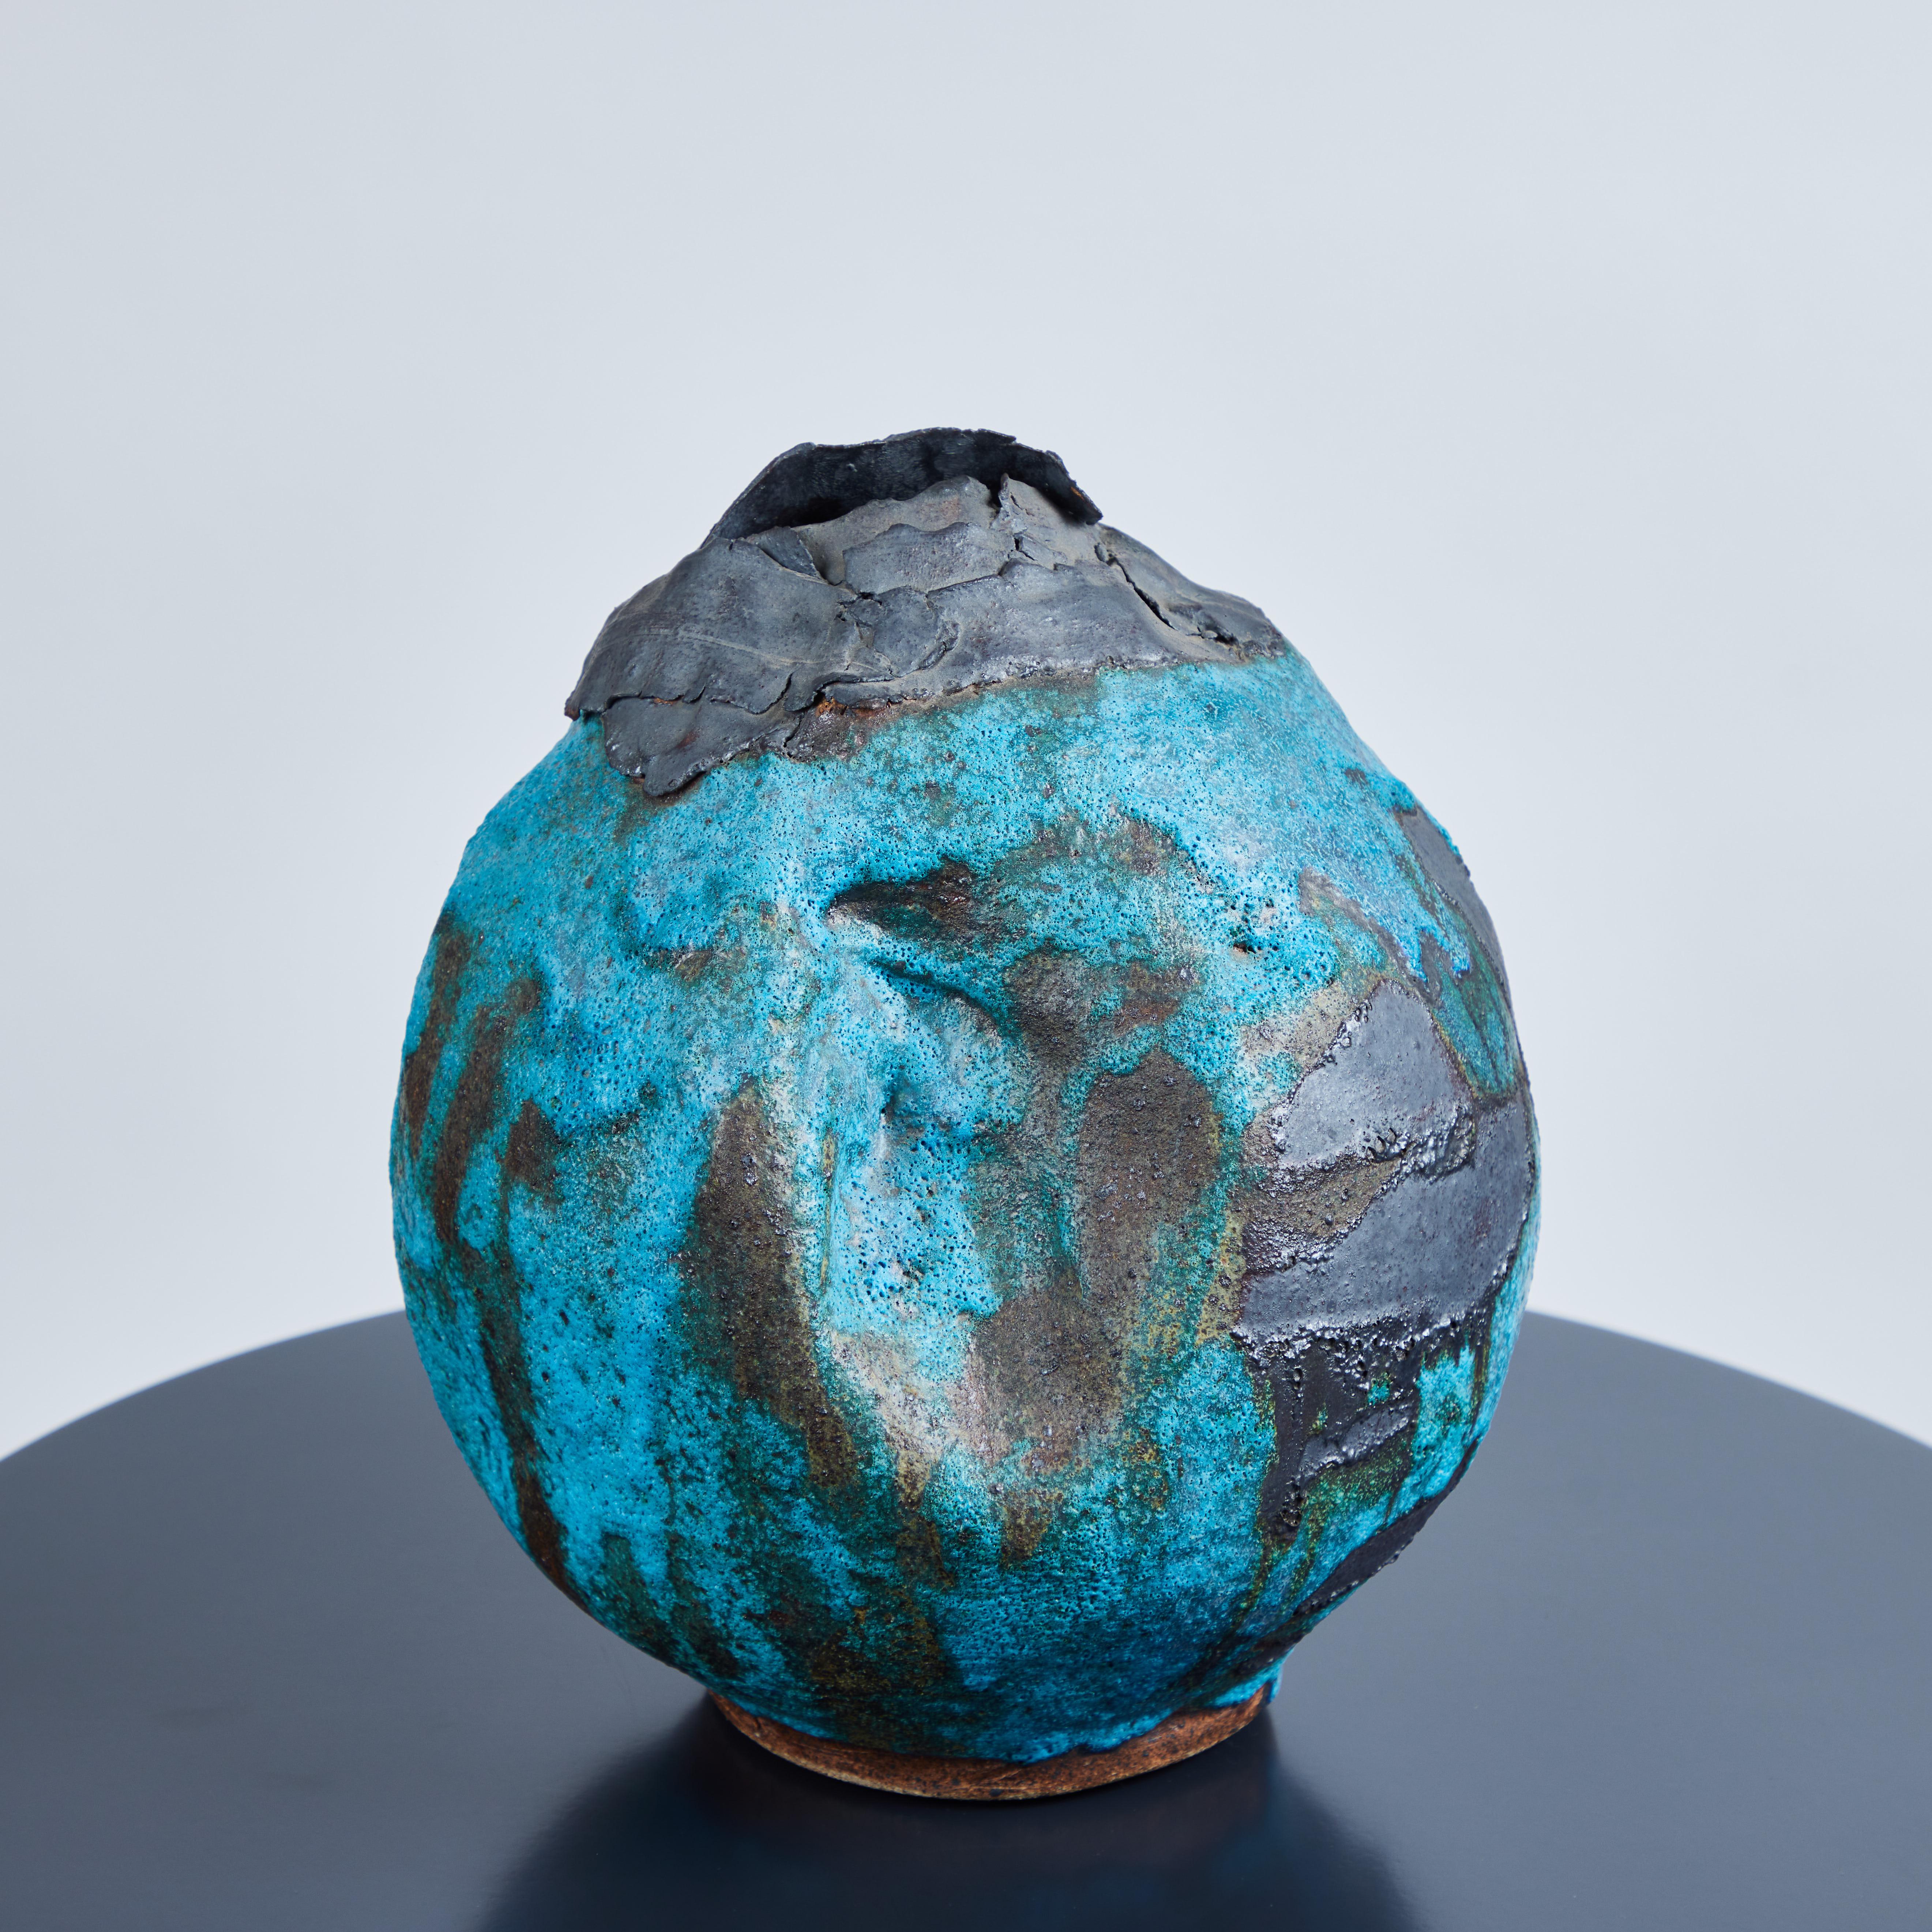 High fired ceramic vessel by Los Angeles artist Caroline Blackburn. This piece is one of her very earliest works, circa early to mic 2000's.